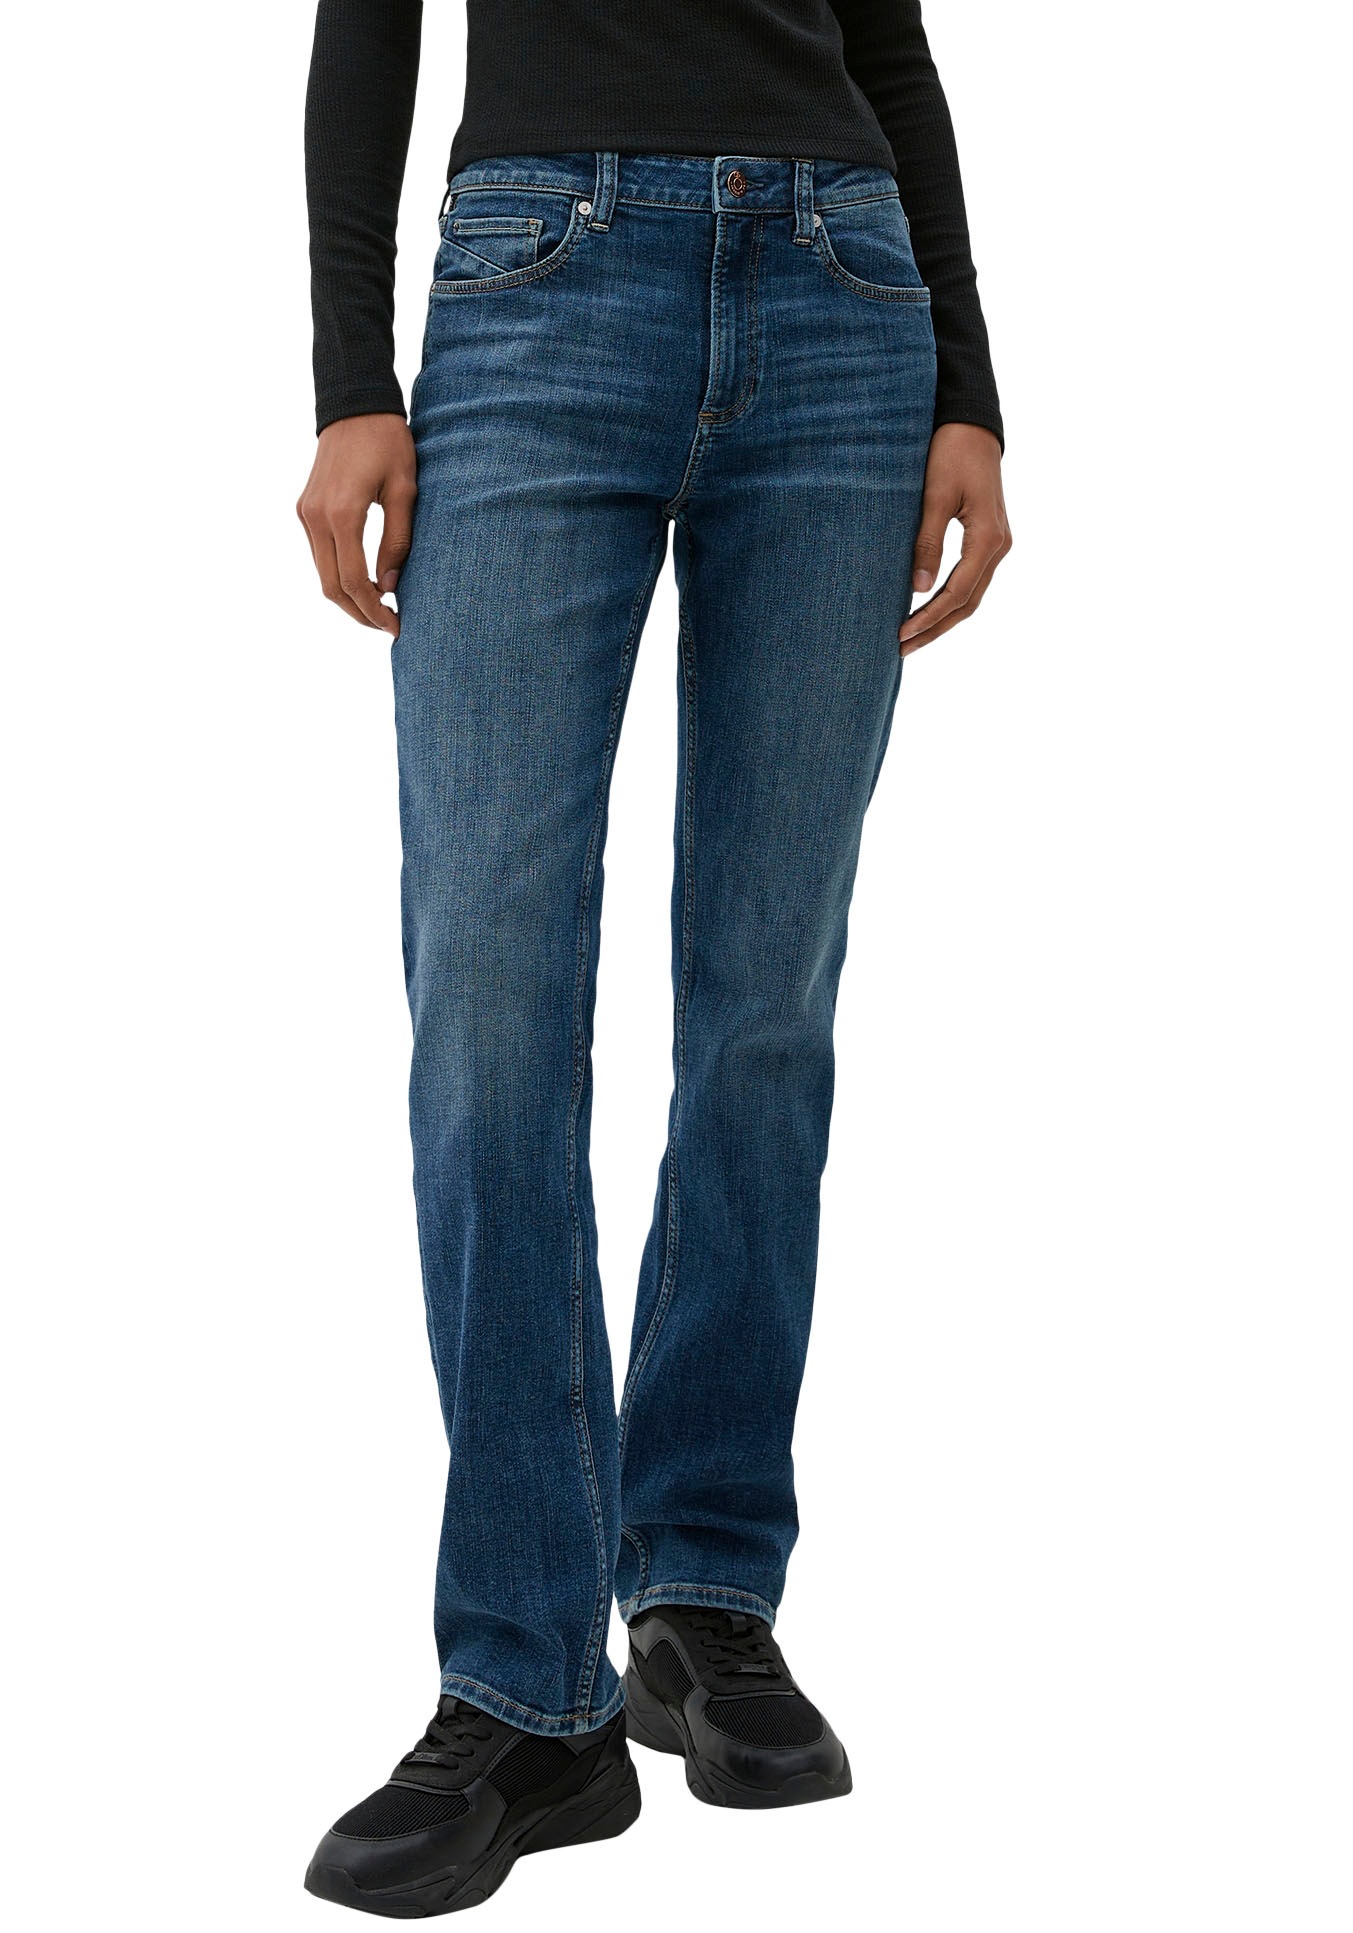 by Q/S »Q/S ♕ by s.Oliver s.Oliver« 5-Pocket-Jeans bei